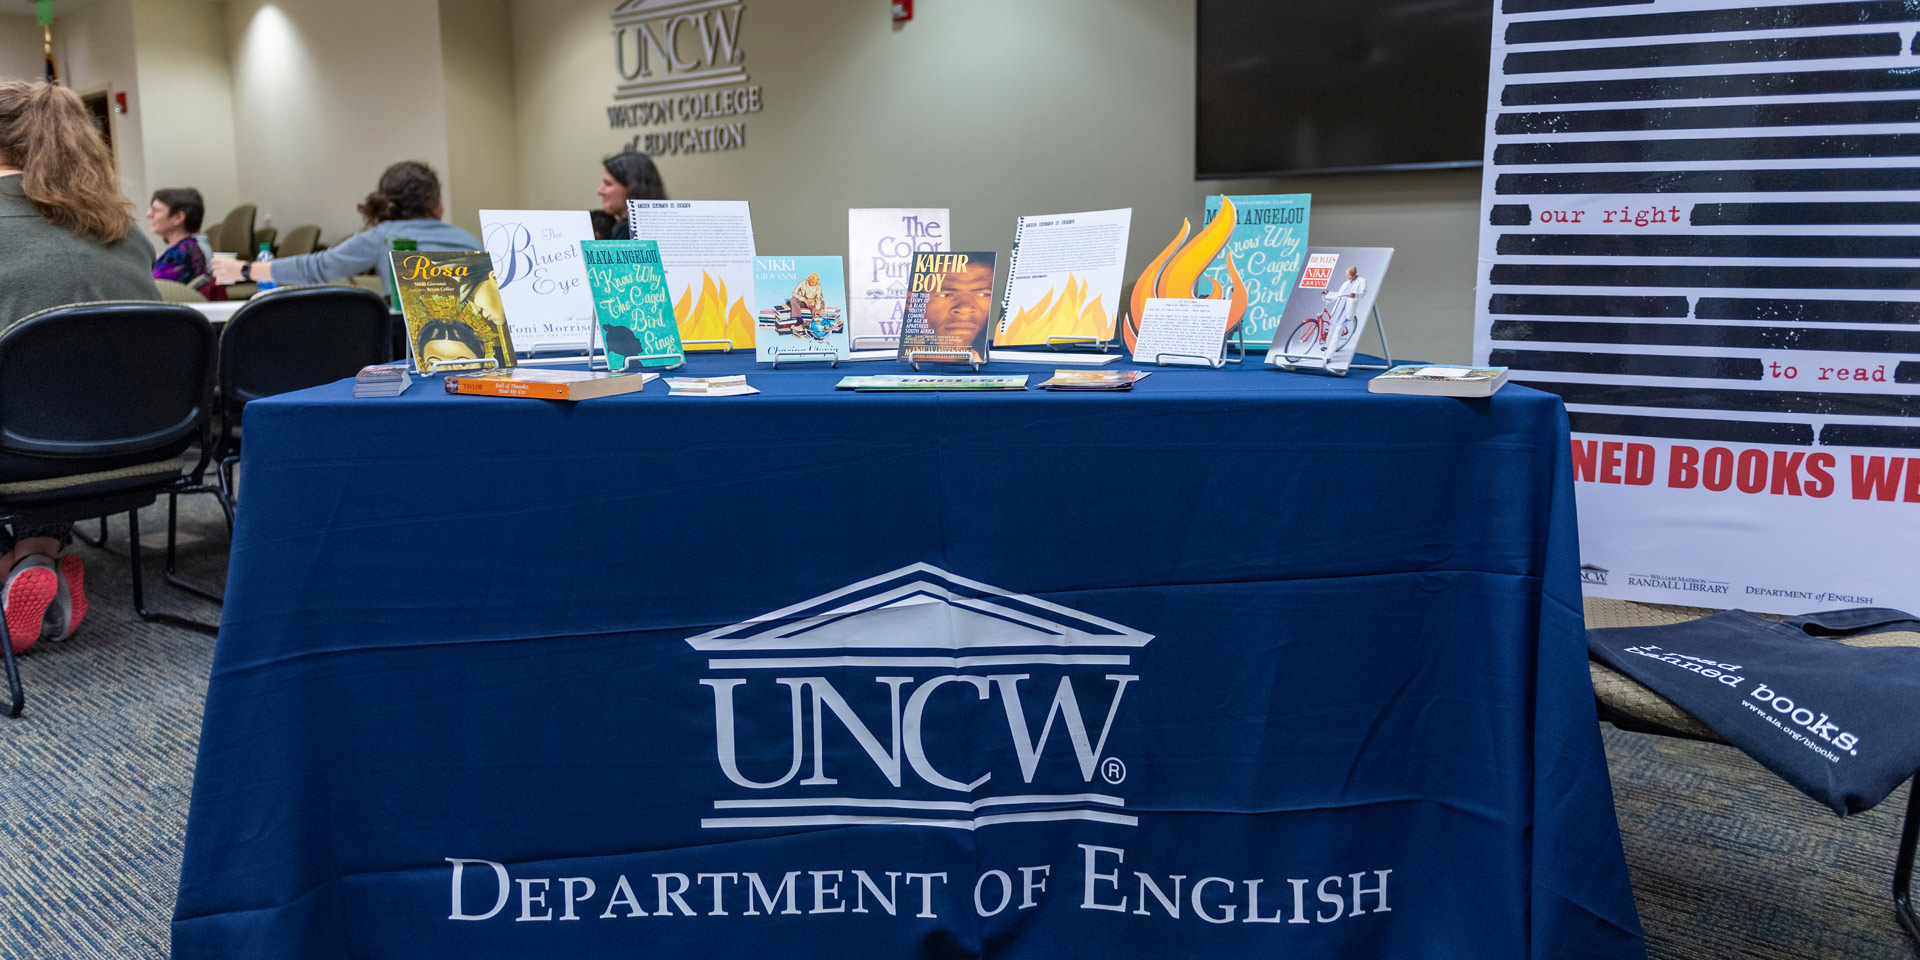 A picture of a desk with books on it and a tablecloth that reads, “UNCW Department of English”